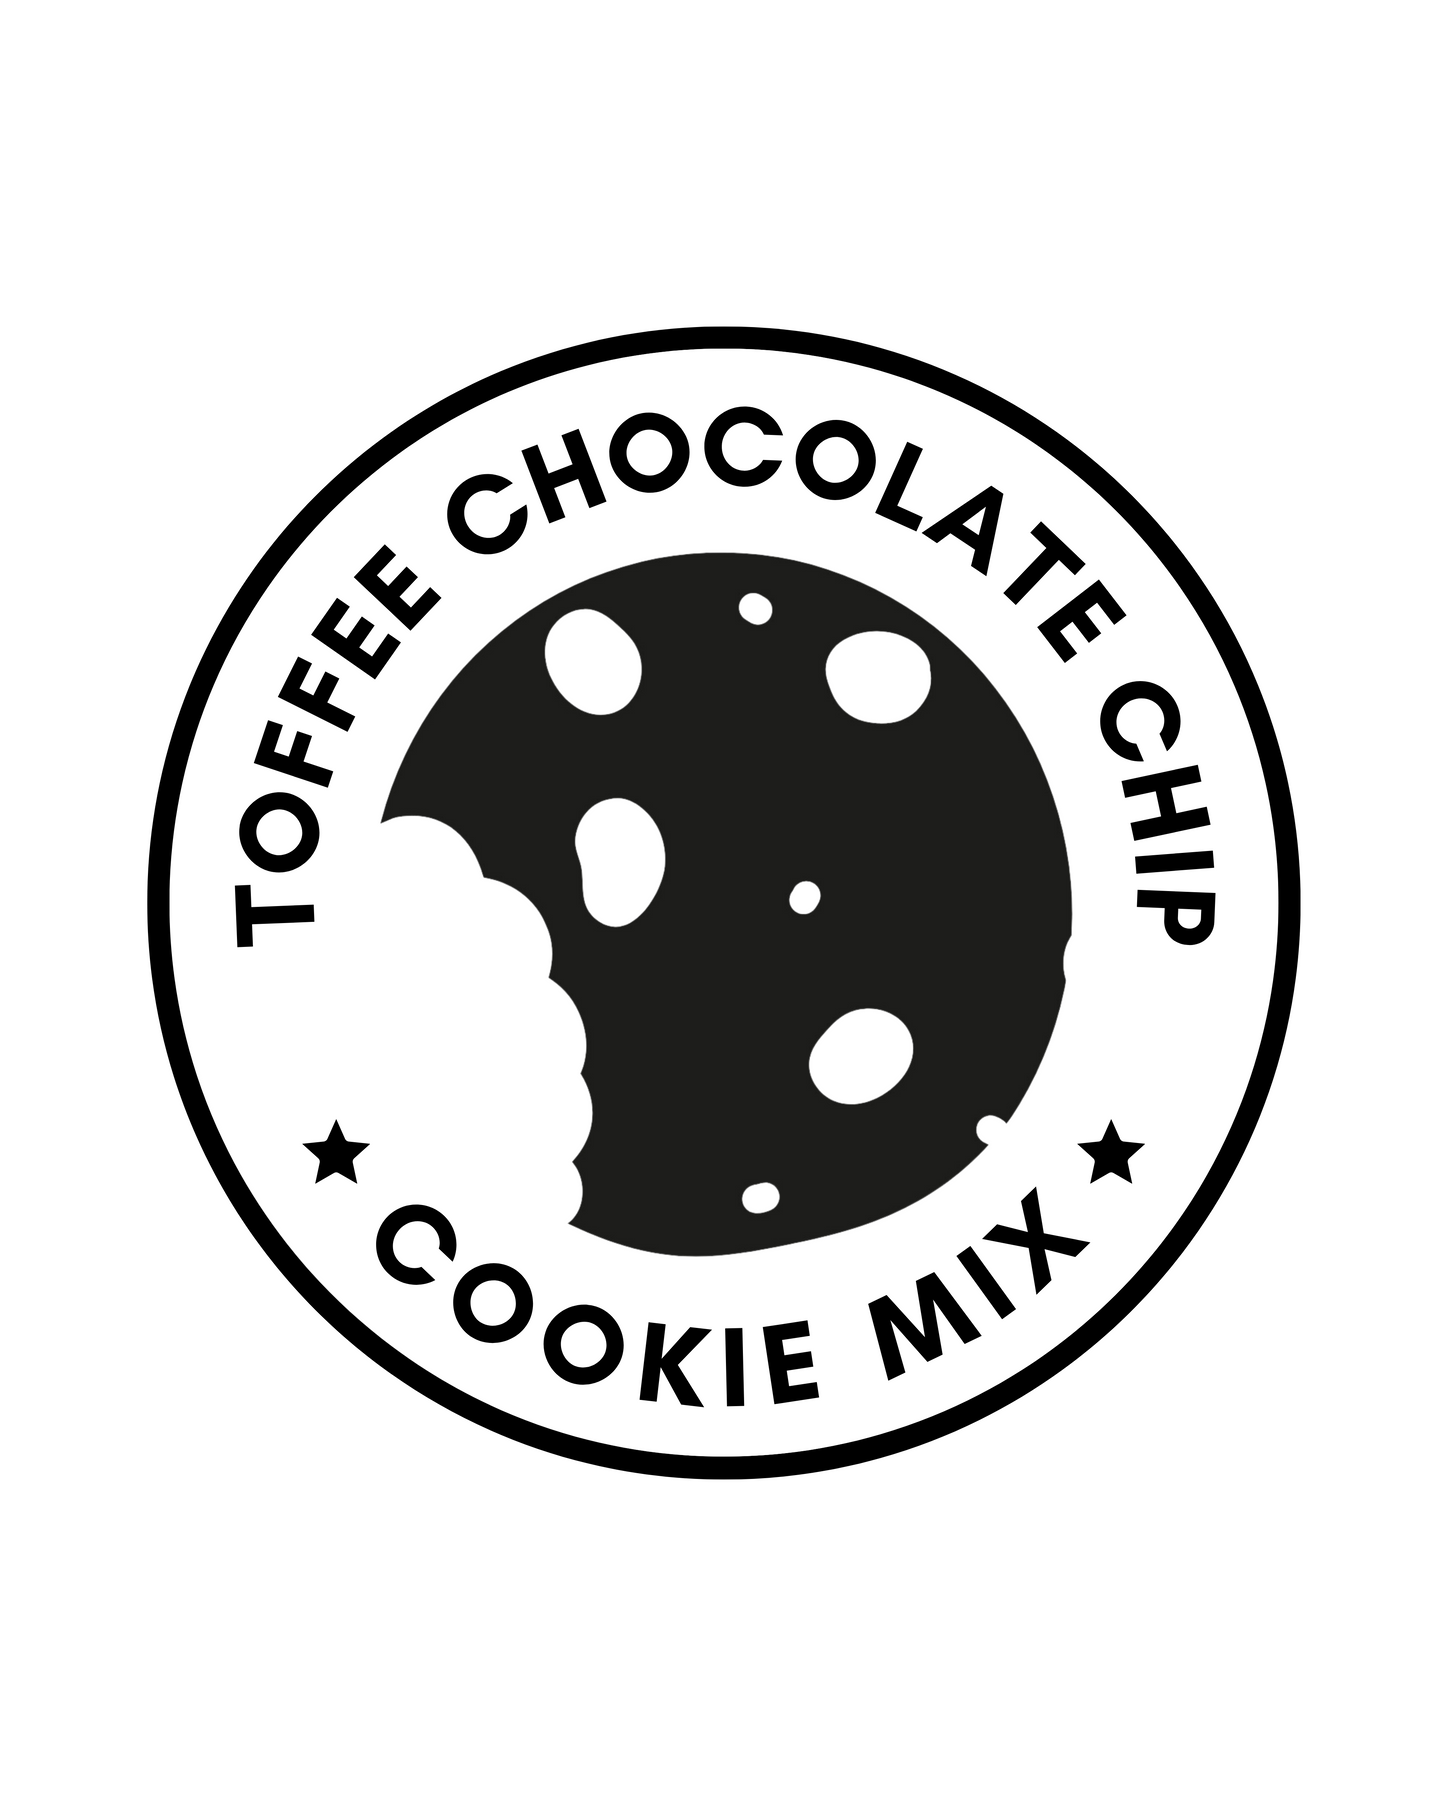 Toffee Chocolate Chip Cookie Mix